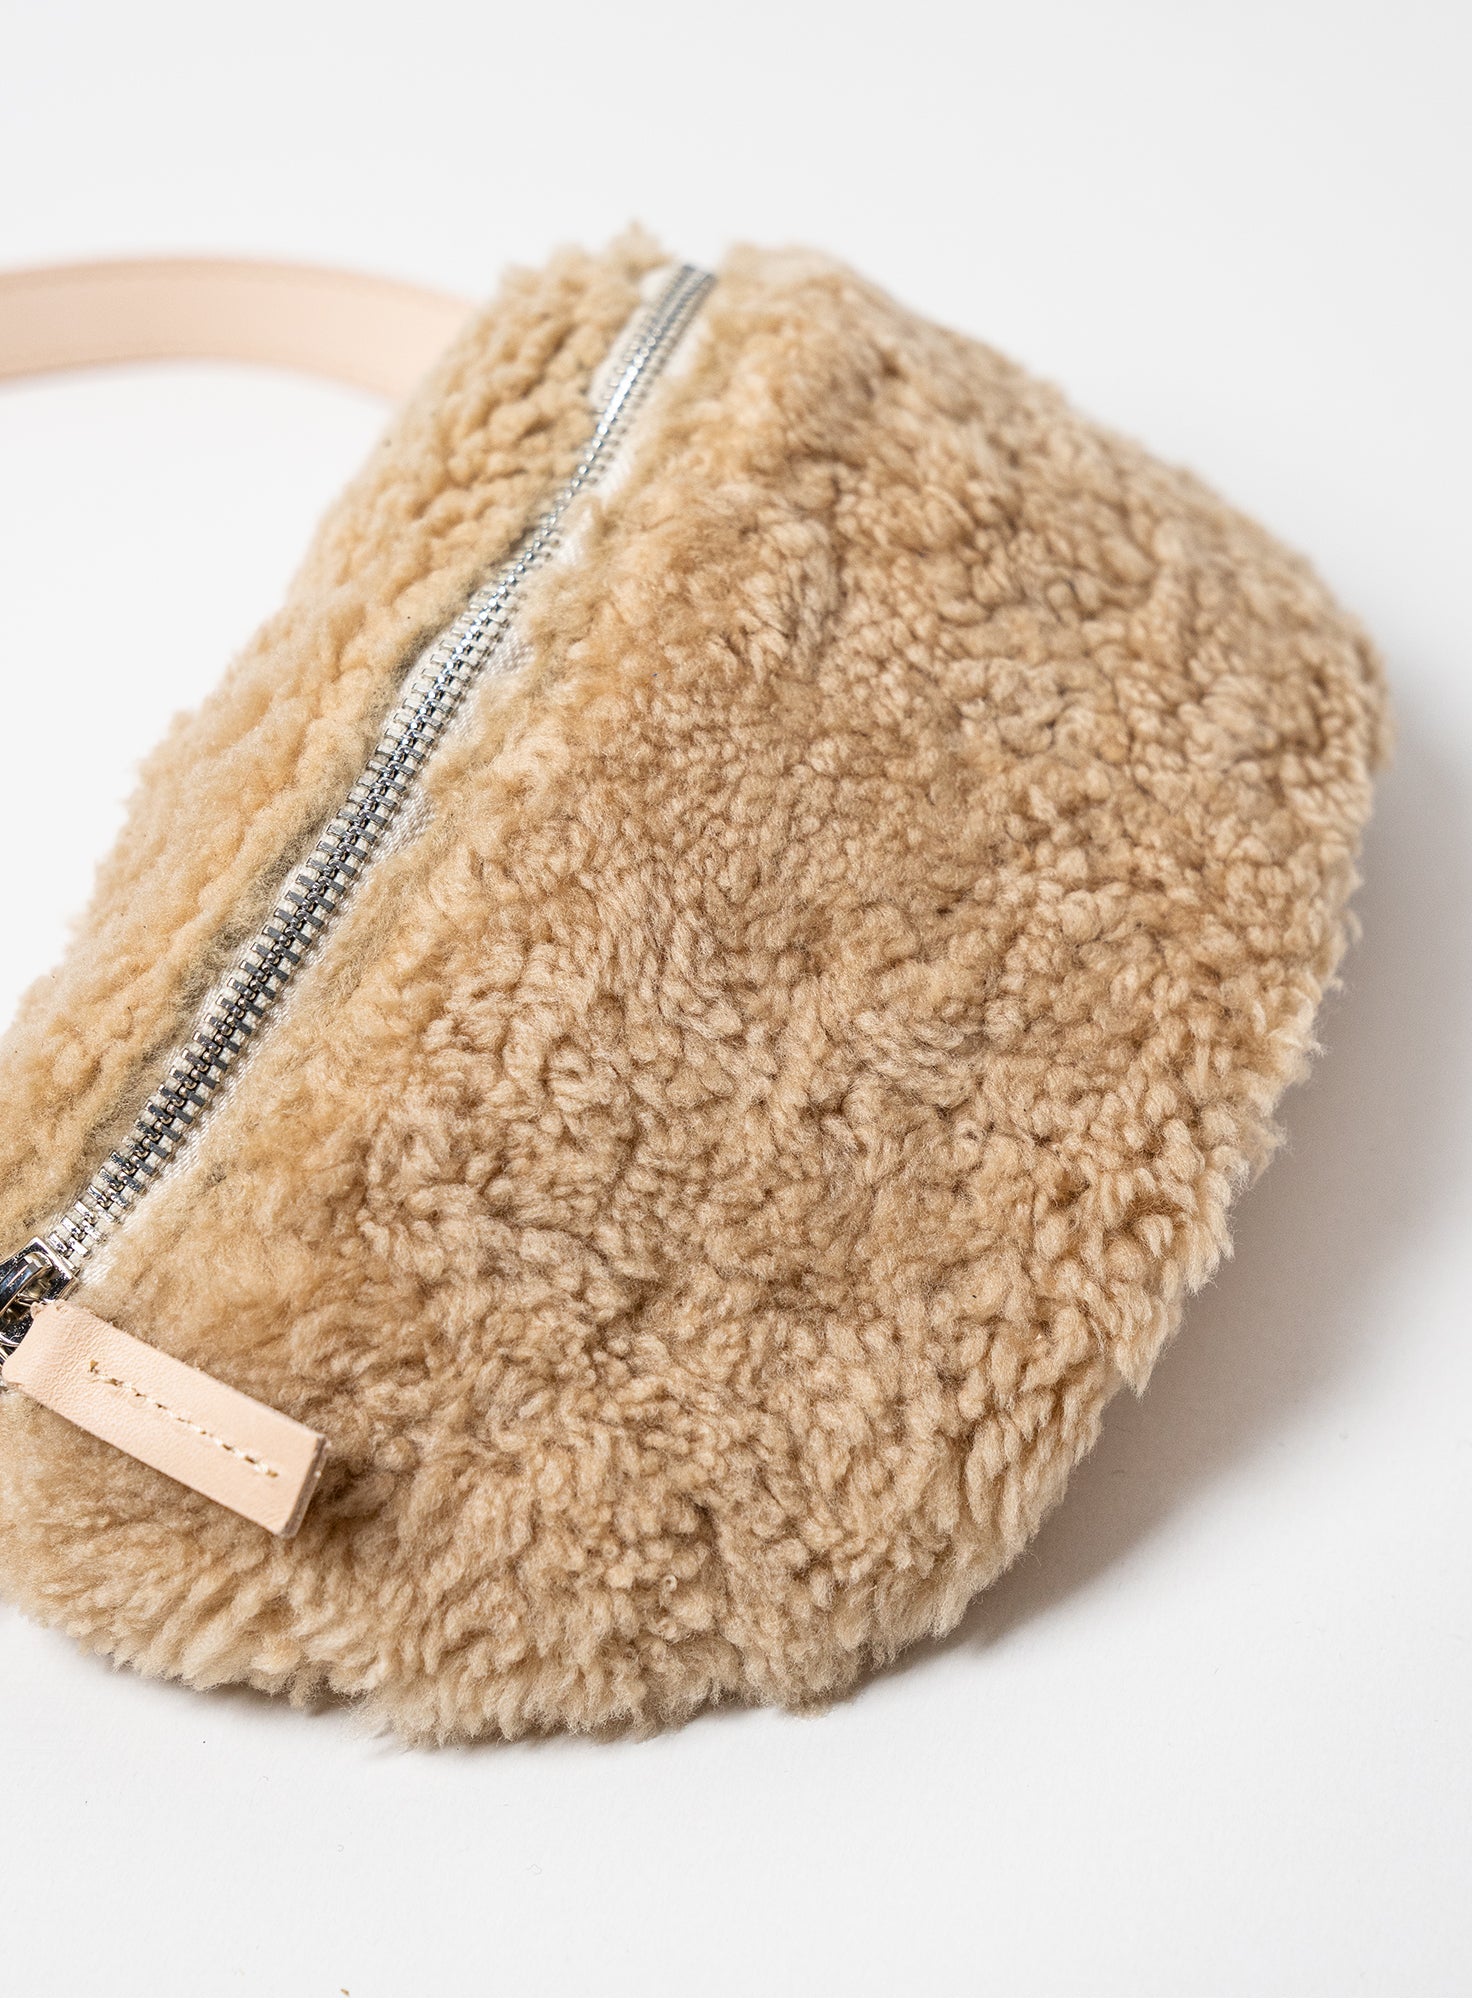 HIP_BAG_CAN_Shearling_Natural_Designed_in_Berlin_Made_to_last_Handmade_in_Poland.